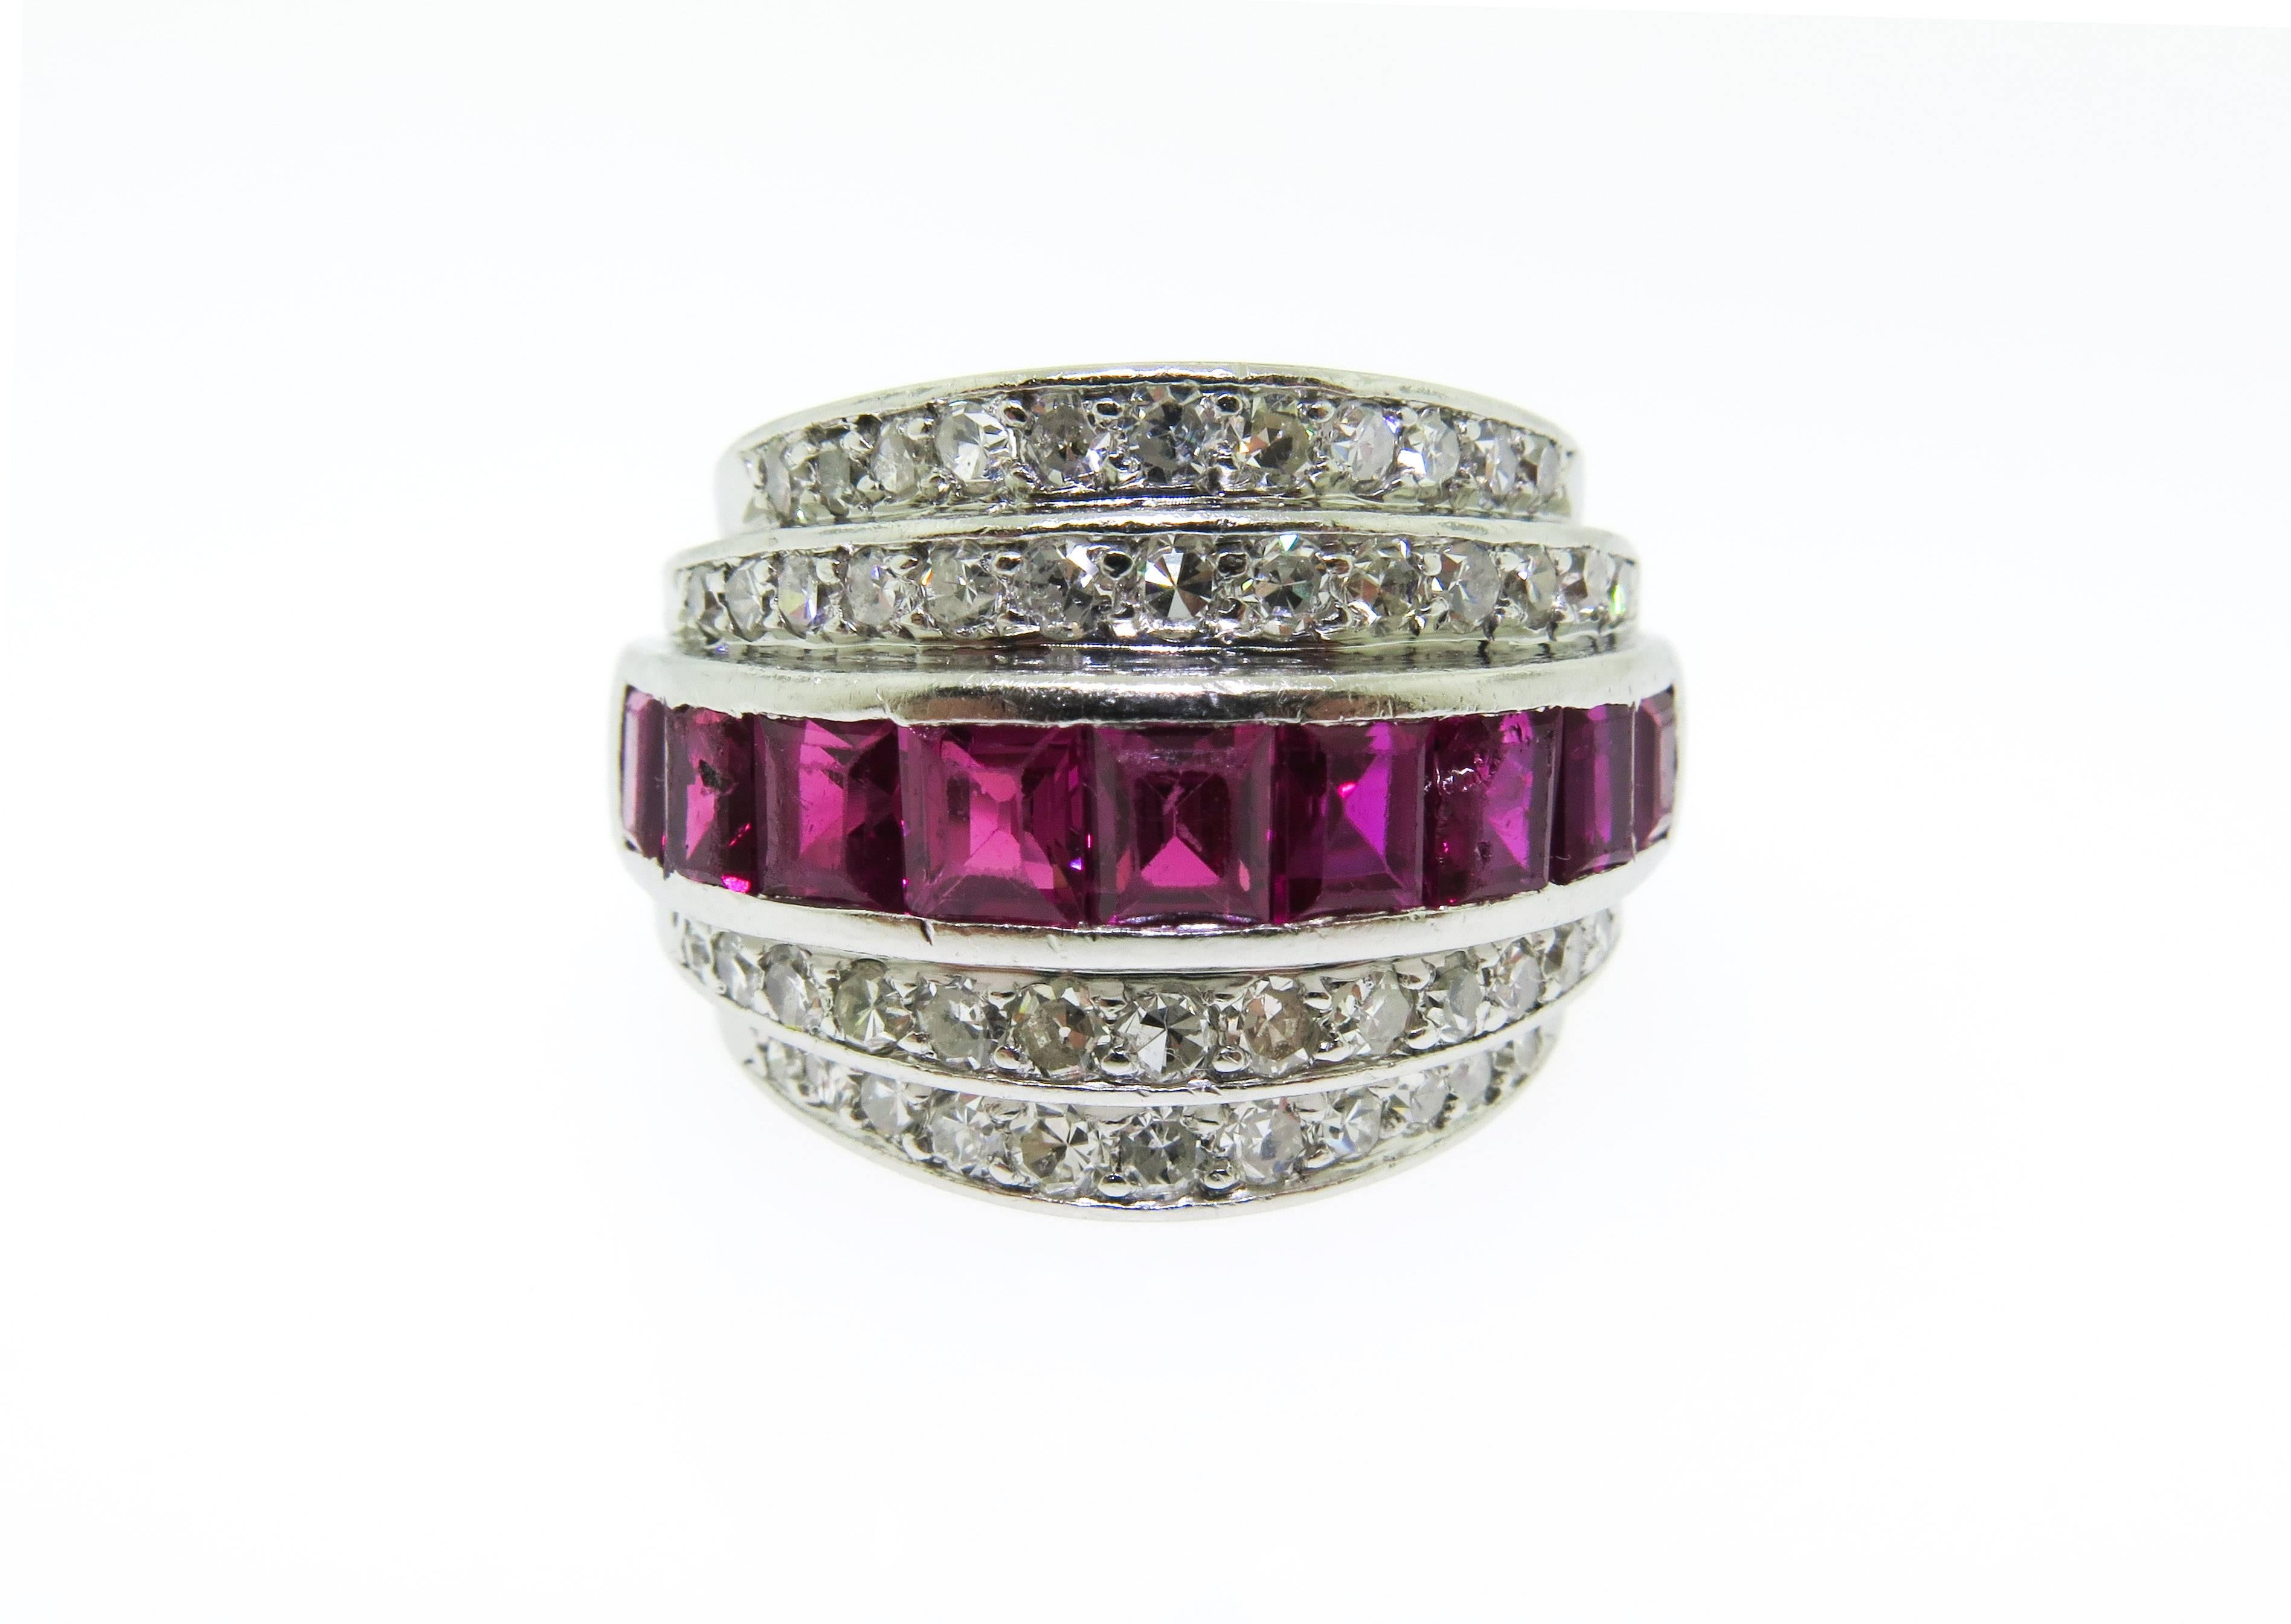 Circa 1960 This slightly domed designed ring with vibrant channel-set princess cut rubies weighing approximately 1.00 carats, perfectly positioned between two rows of beautiful round diamonds totaling approximately 1.50 carat,  G - H color, SI